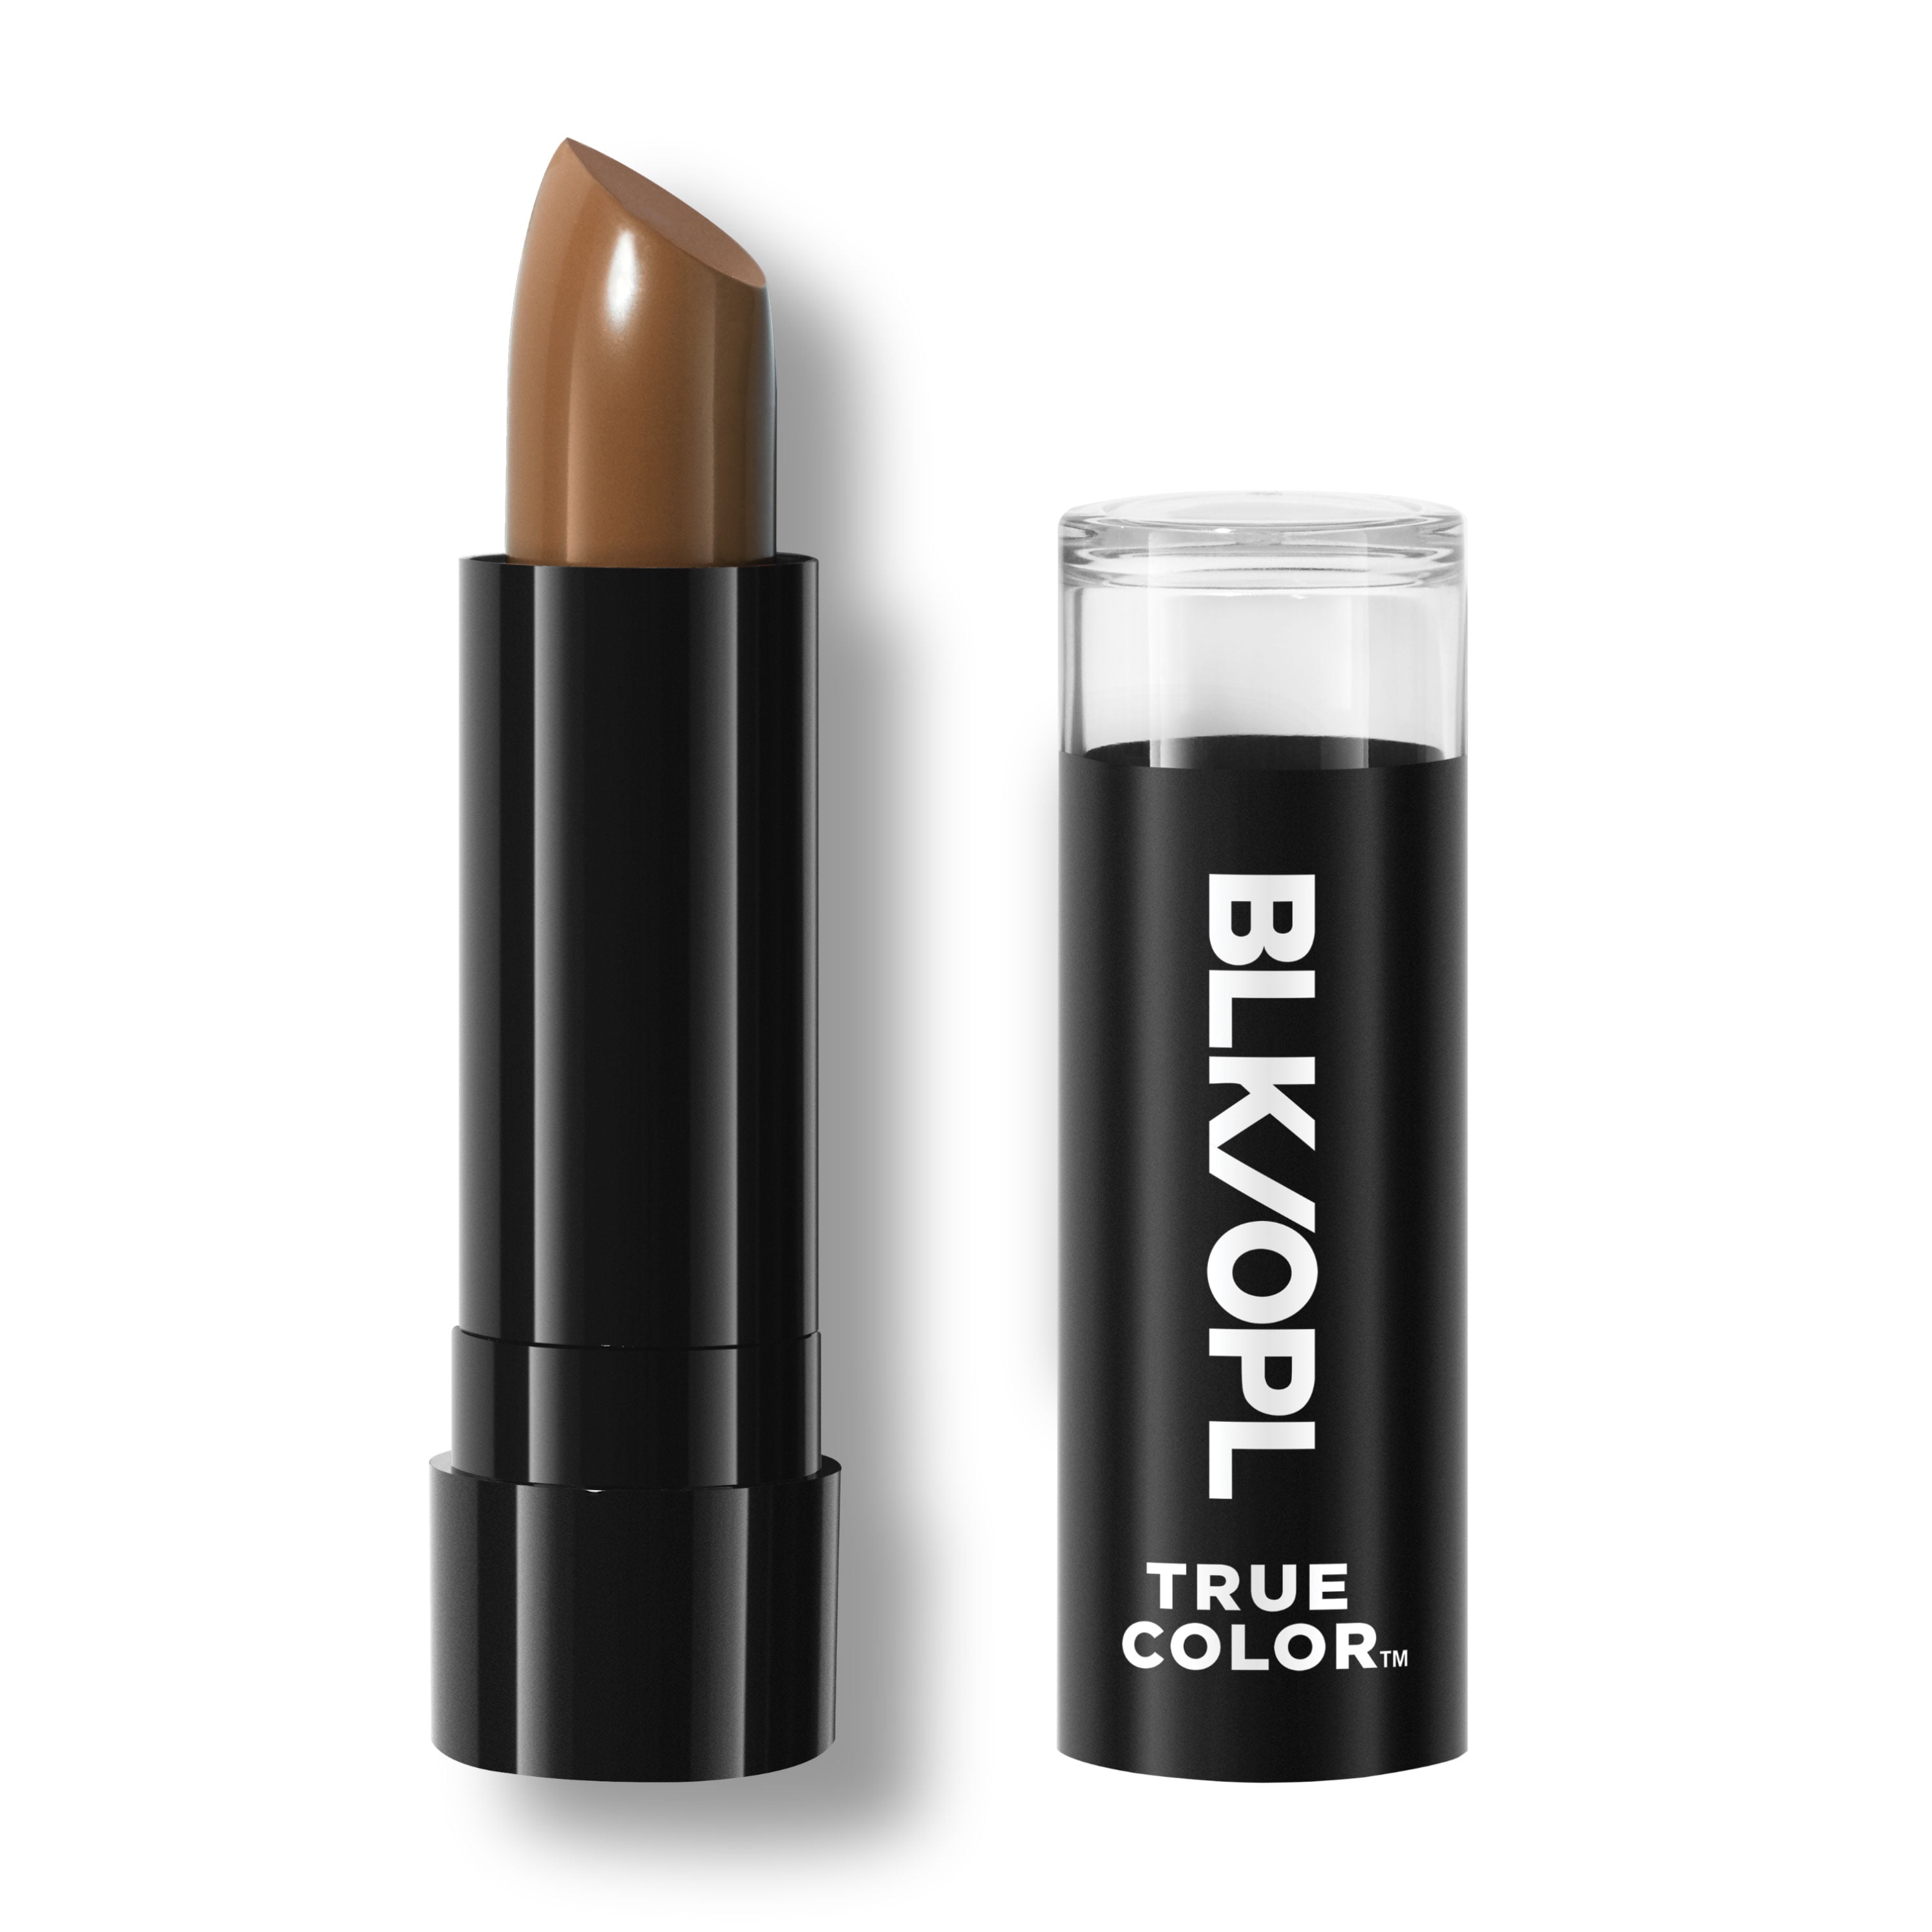 Black Opal Flawless Perfecting Concealer, Vitamins A, C, & E, Beautiful Bronze